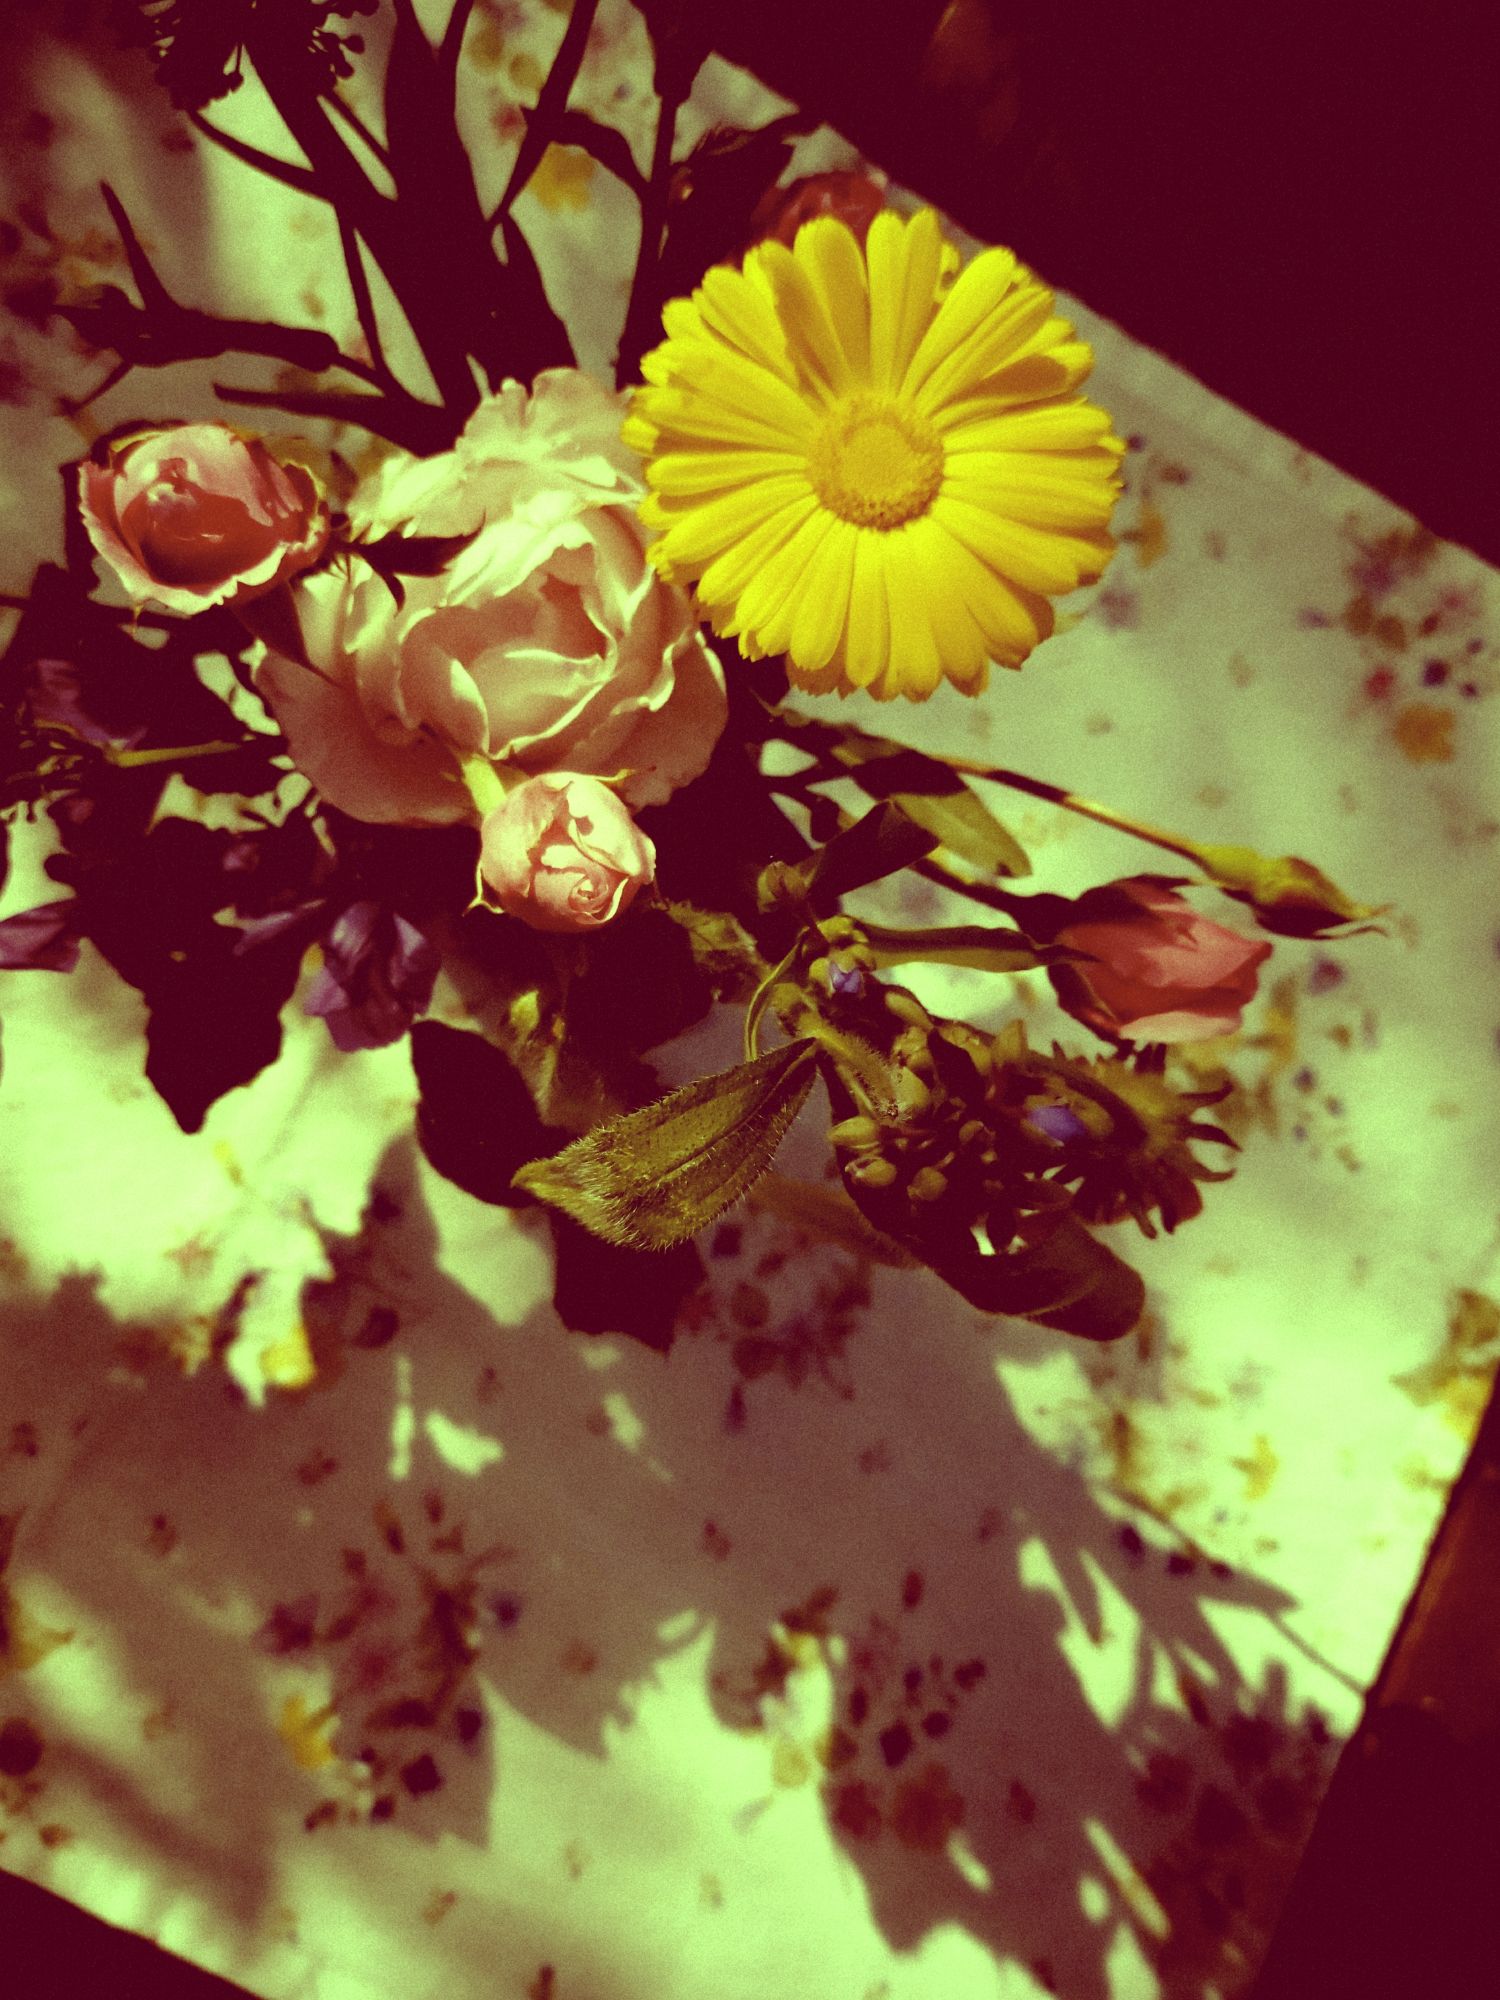 A bouquet of flowers on a tablecloth, afternoon light.